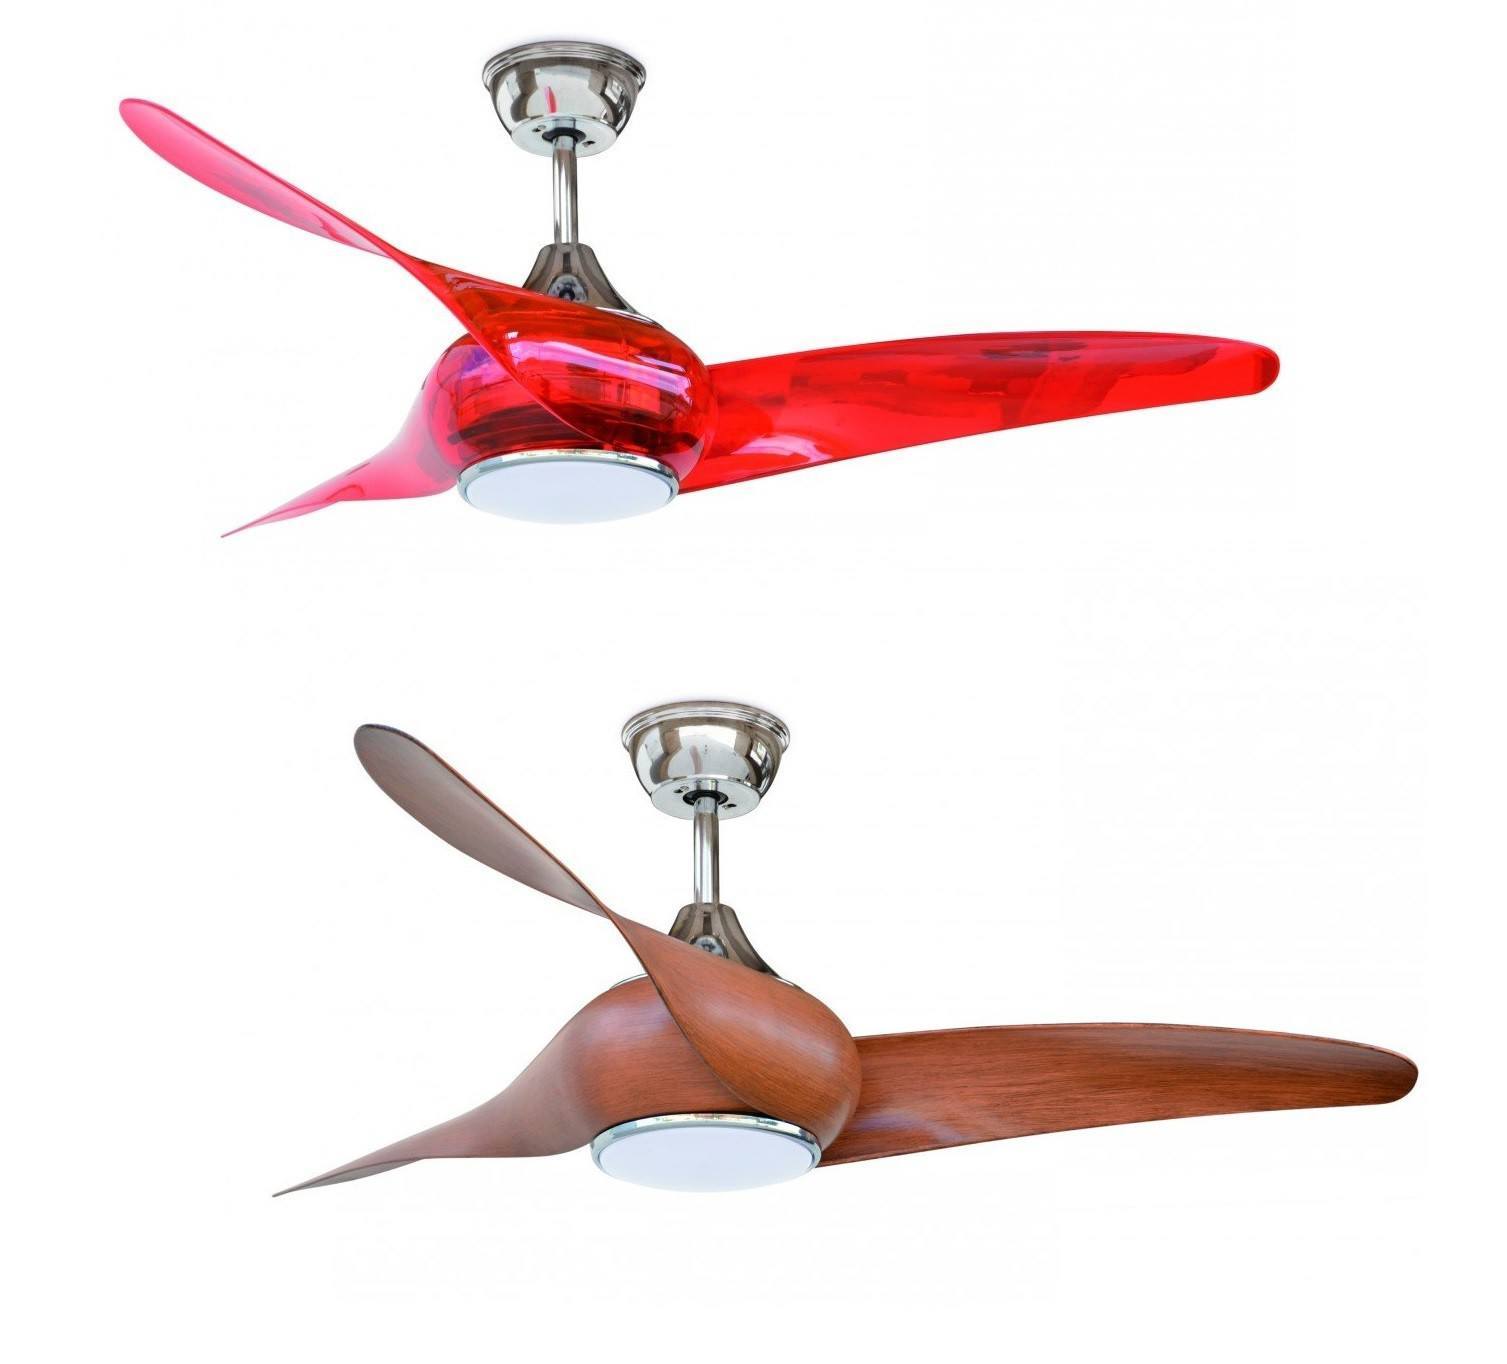 Ceiling Fan Exo Cefiro Led 18w 3000k Cherry Wood Red Transparent